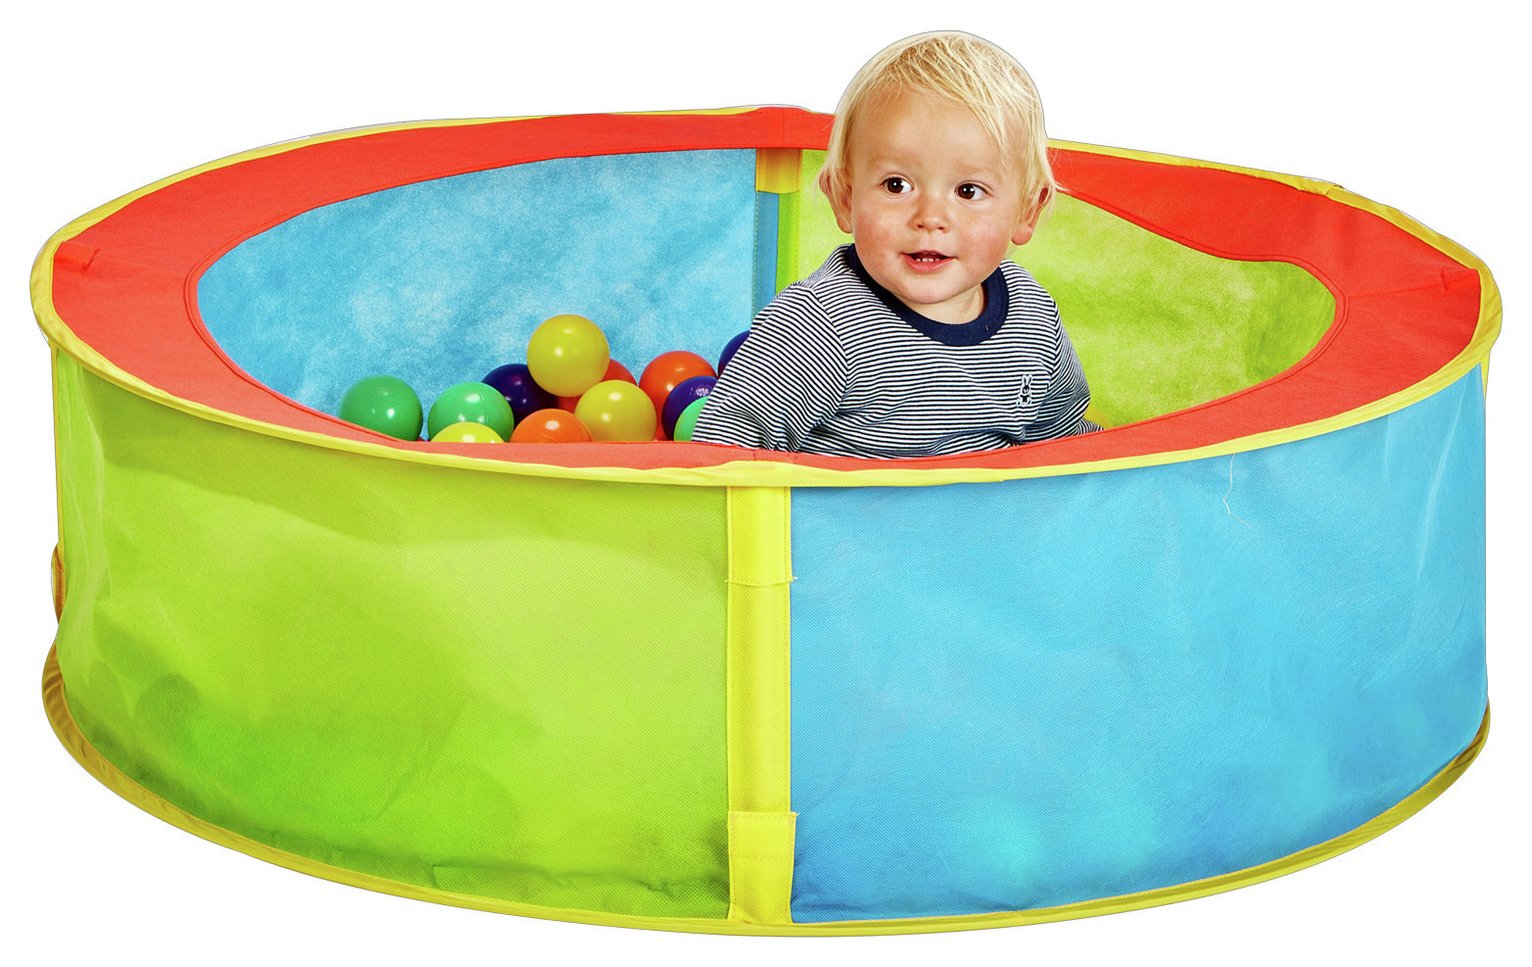 Chad Valley Pop Up Ball Pit Review